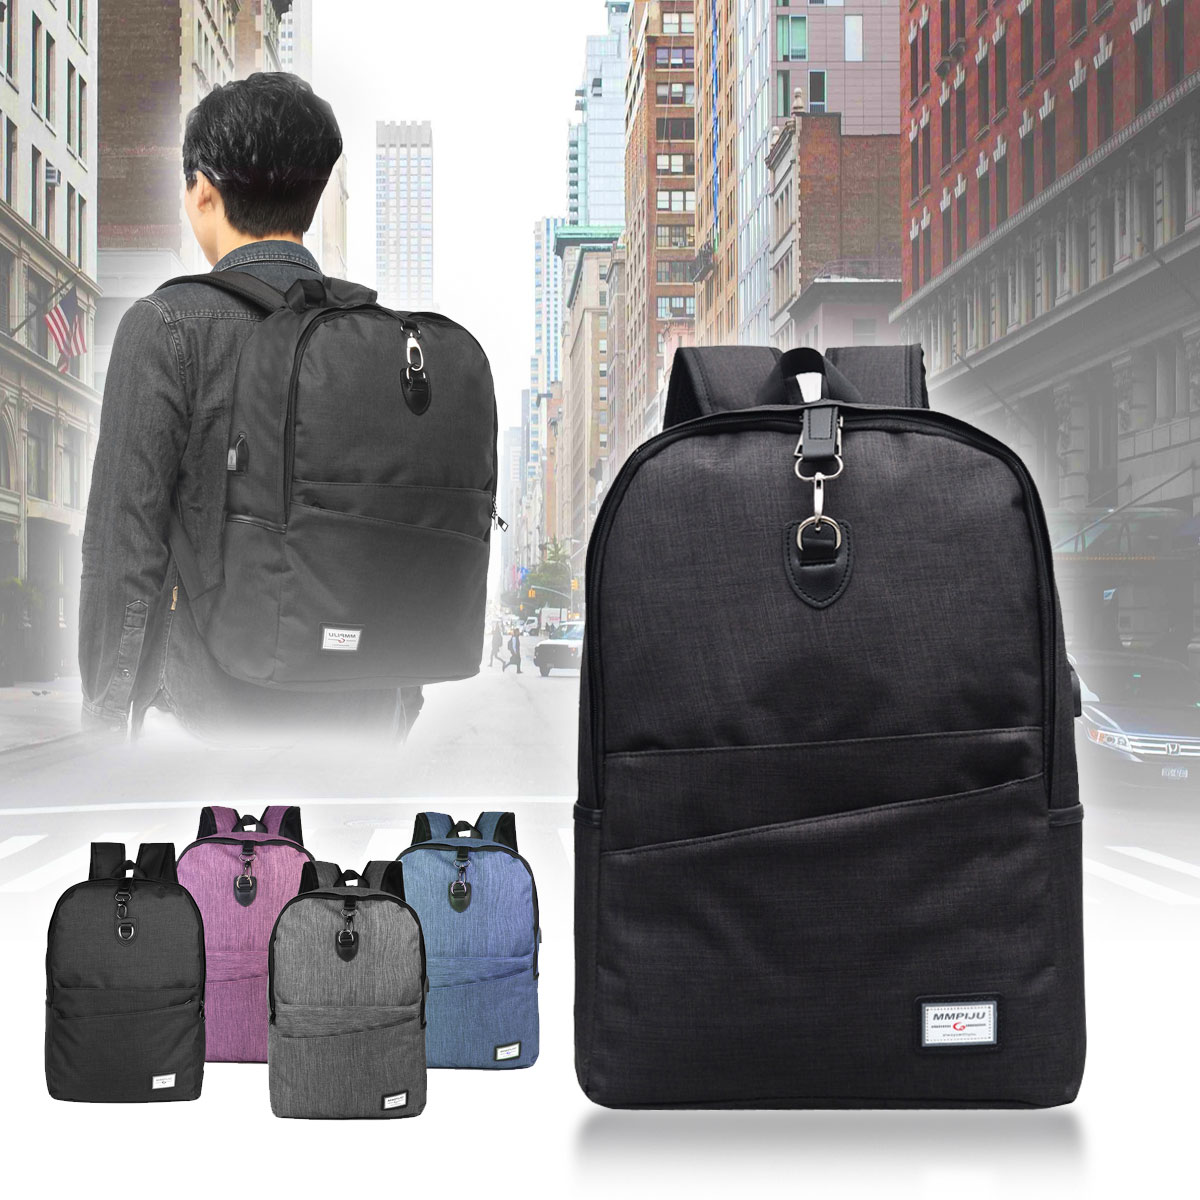 USB-Charging-Backpack-Anti-Thief-Laptop-Travel-Shoulder-Bag-with-Headphone-Plug-for-Macbook-1266101-4